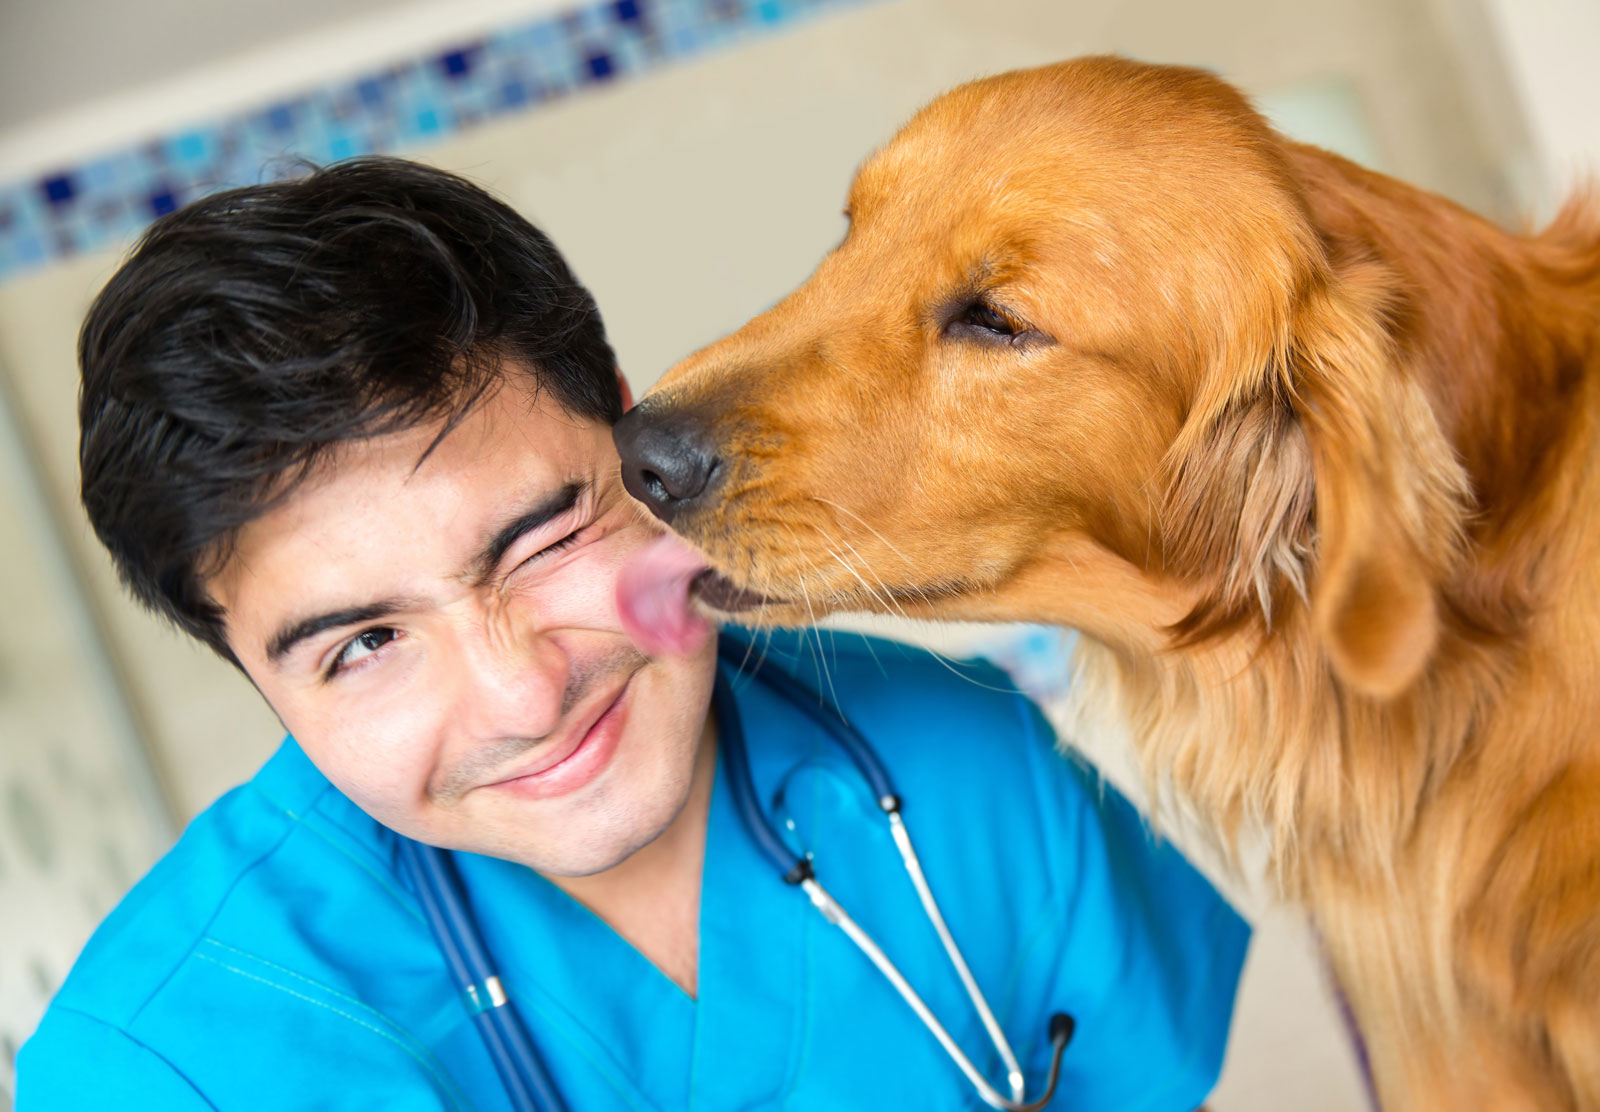 Patient Advantage helps patients pay for Pet Care through a variety of lending programs.